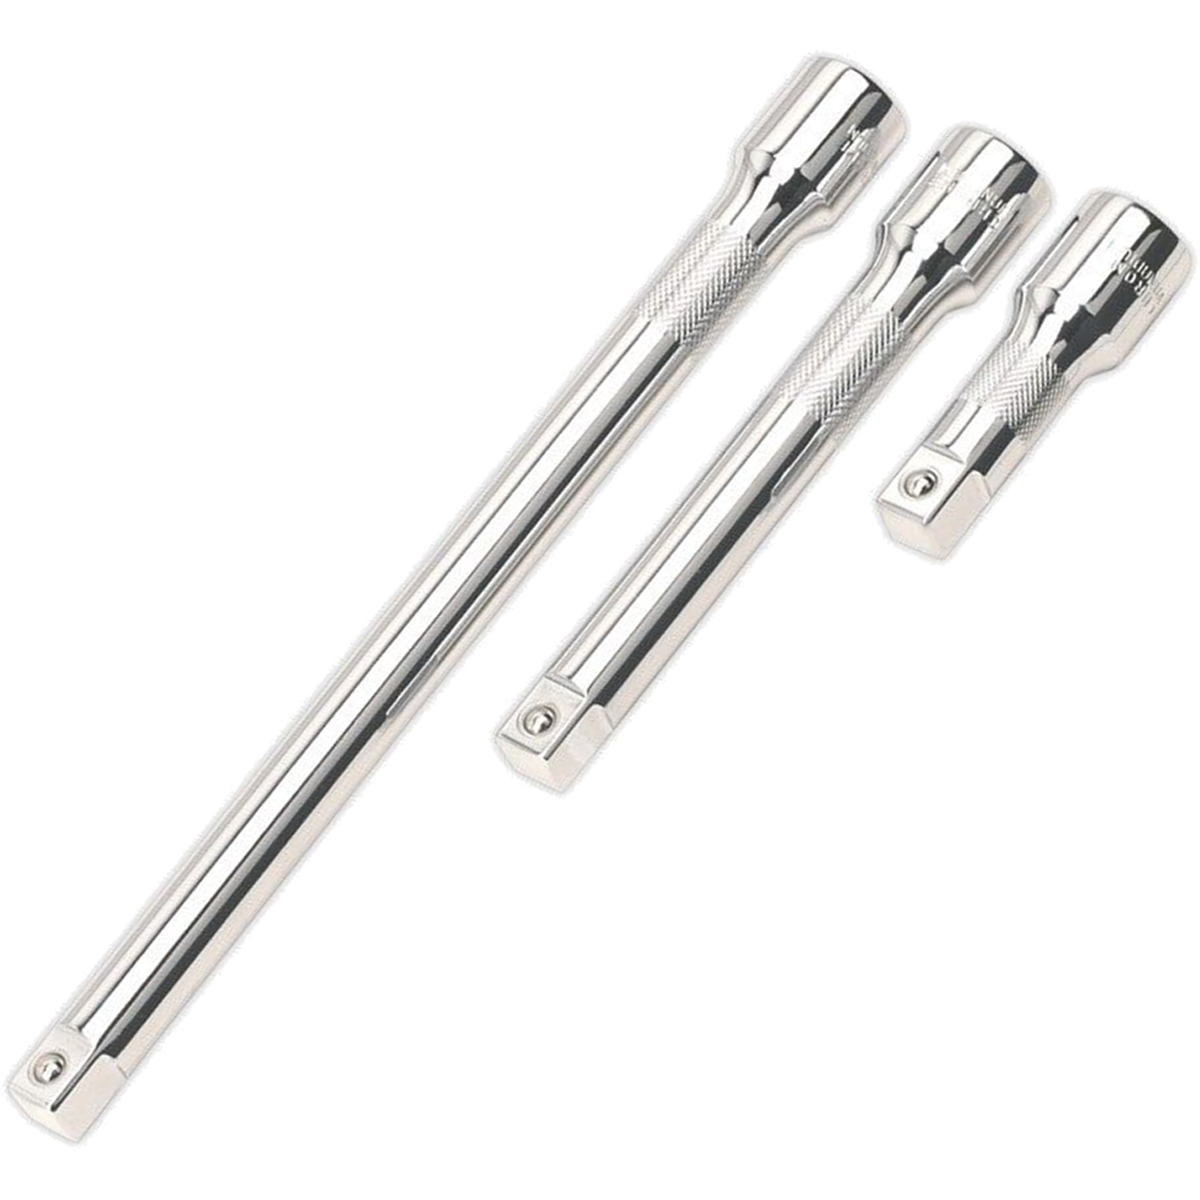 Socket extension bars for use with socket wrenches. Allows the user to reach those are to get to those hard to reach torquing applications